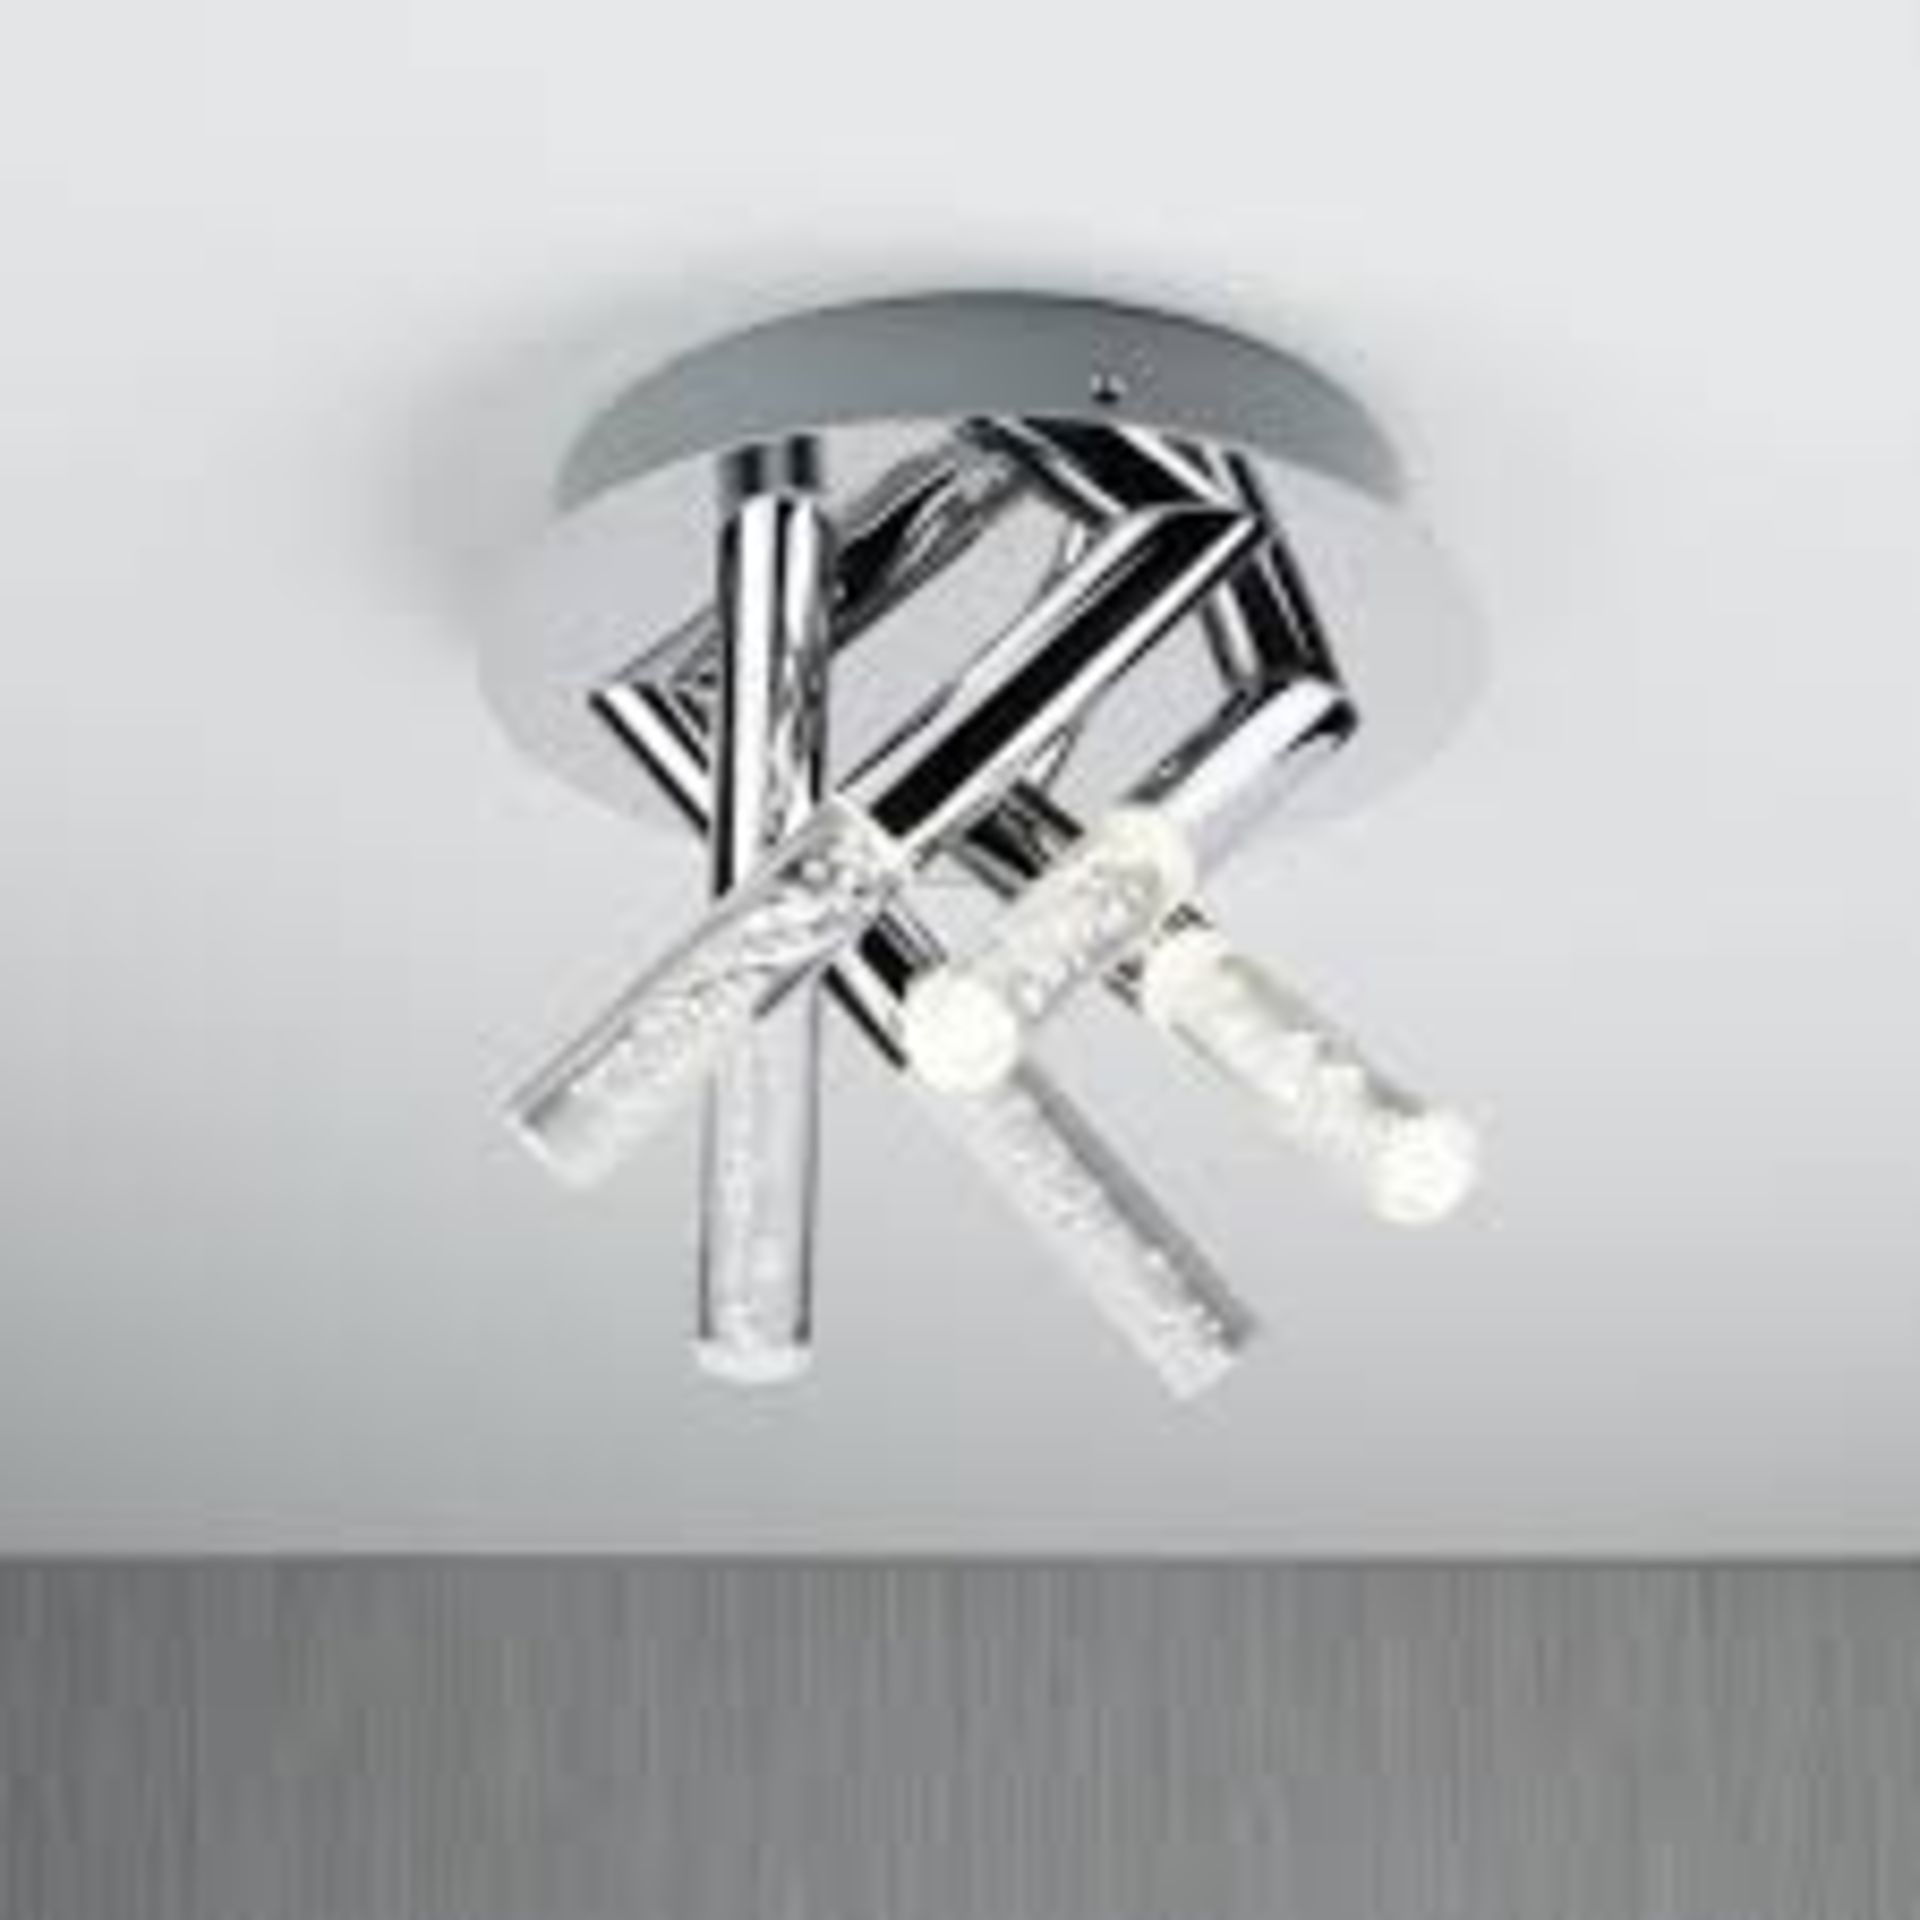 1 x Searchlight 5 light chrome ceiling light - Ref: 2375-5CC - MEZ-AR-A - New Boxed - RRP: £148.80 - Image 2 of 3